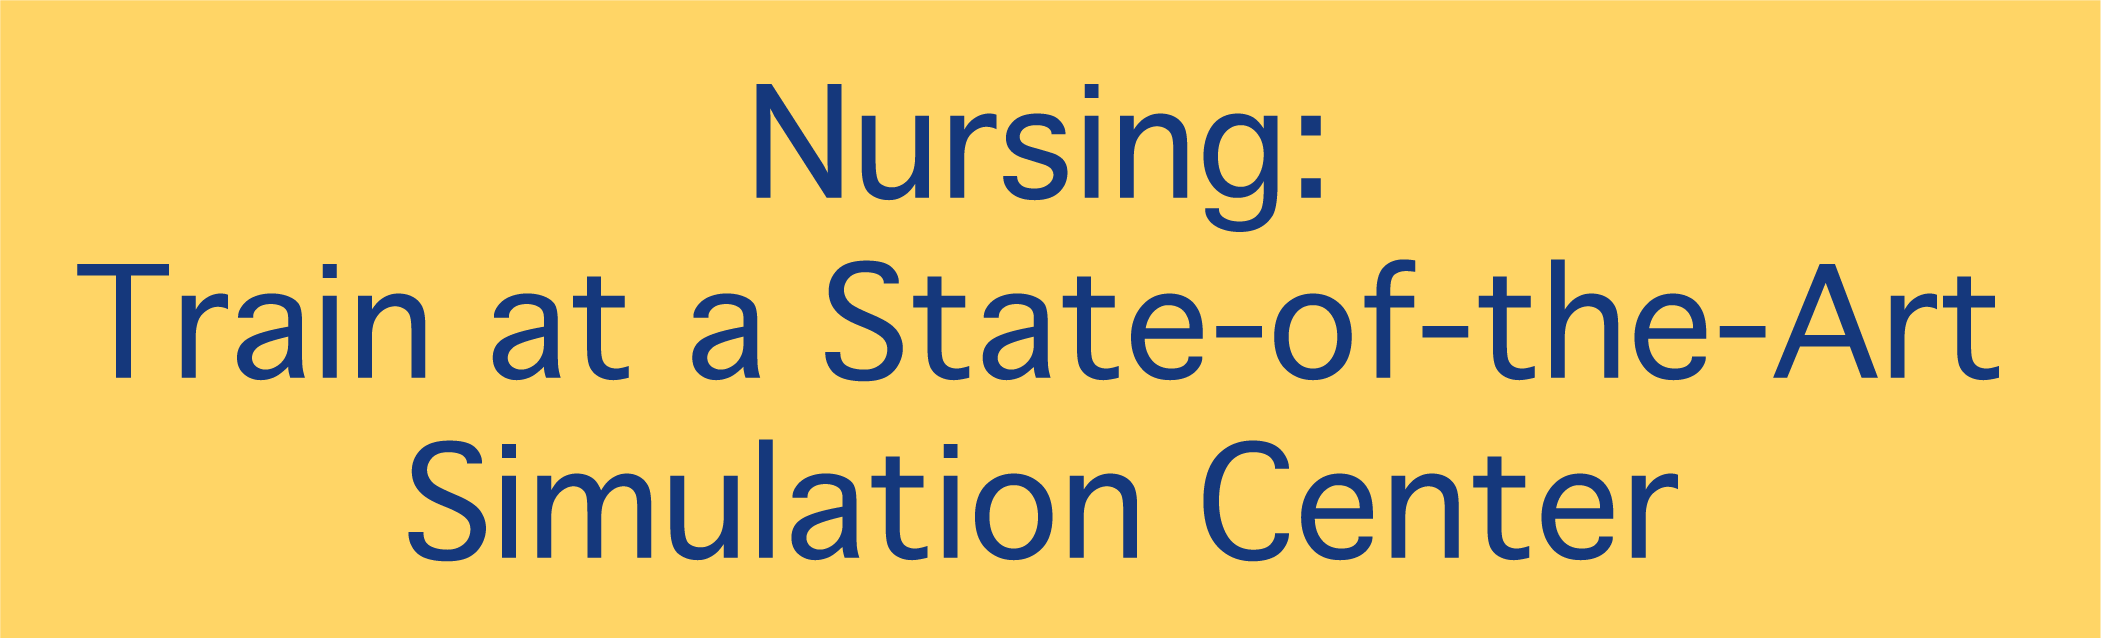 Nursing: Train at a State-of-the-Art Simulation Center